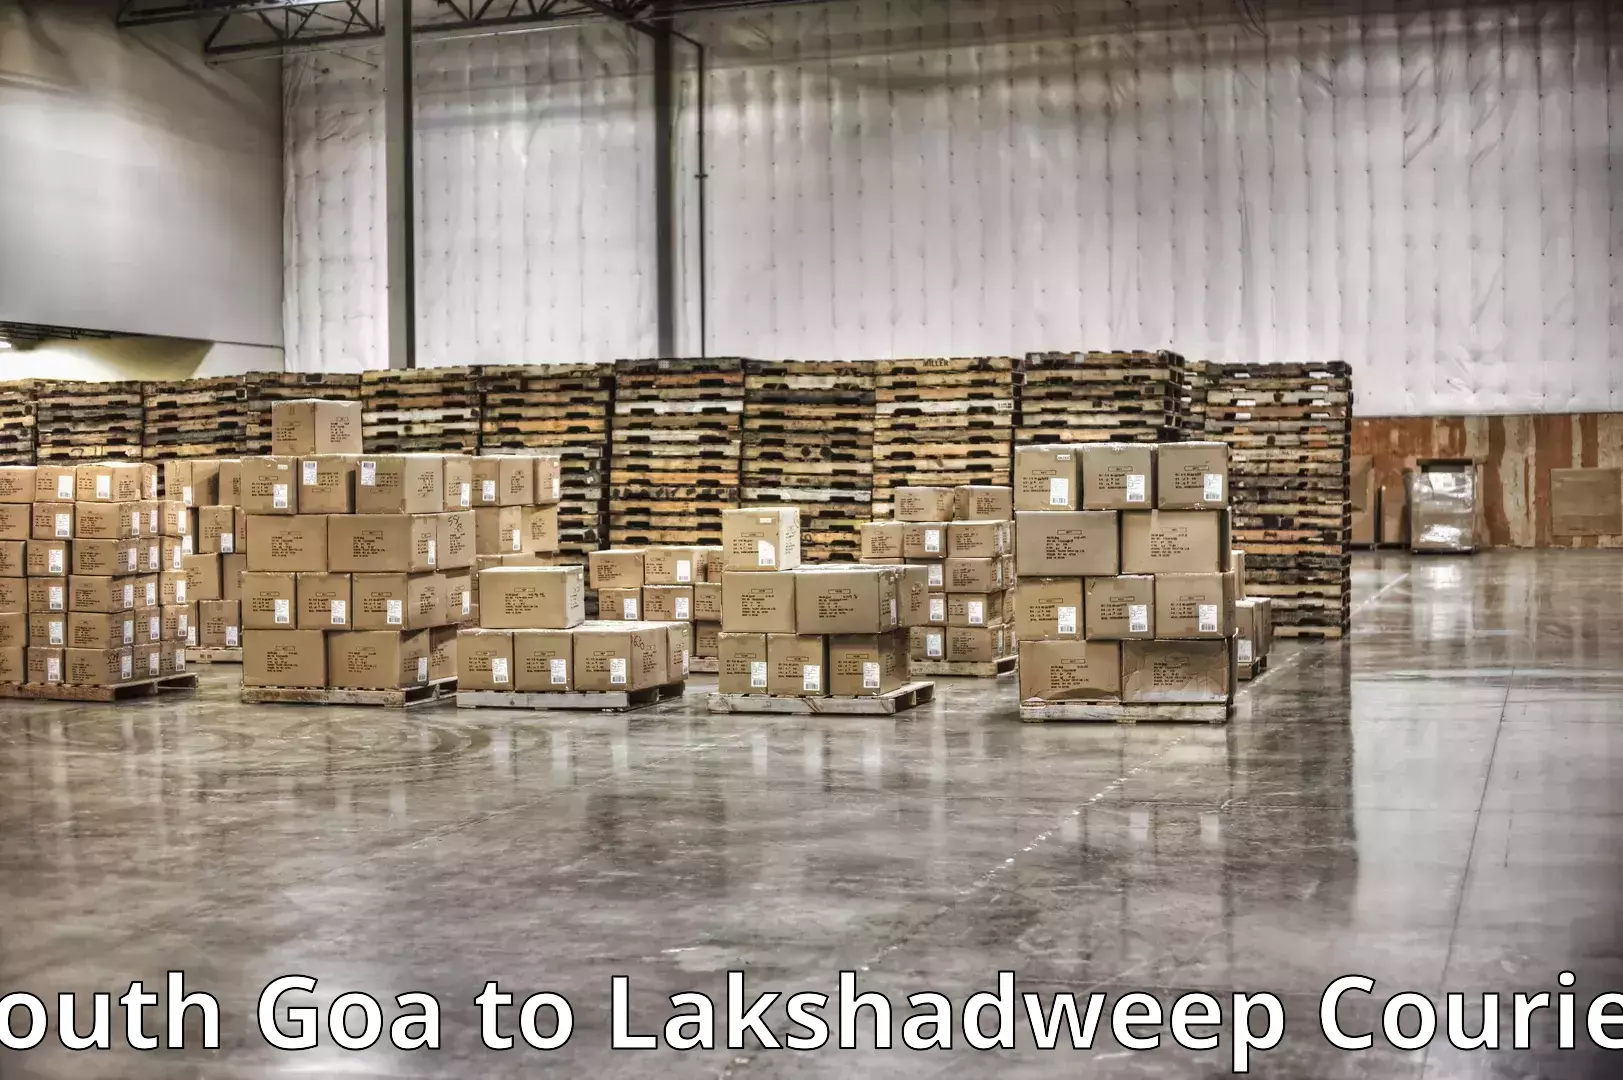 Trusted moving company South Goa to Lakshadweep